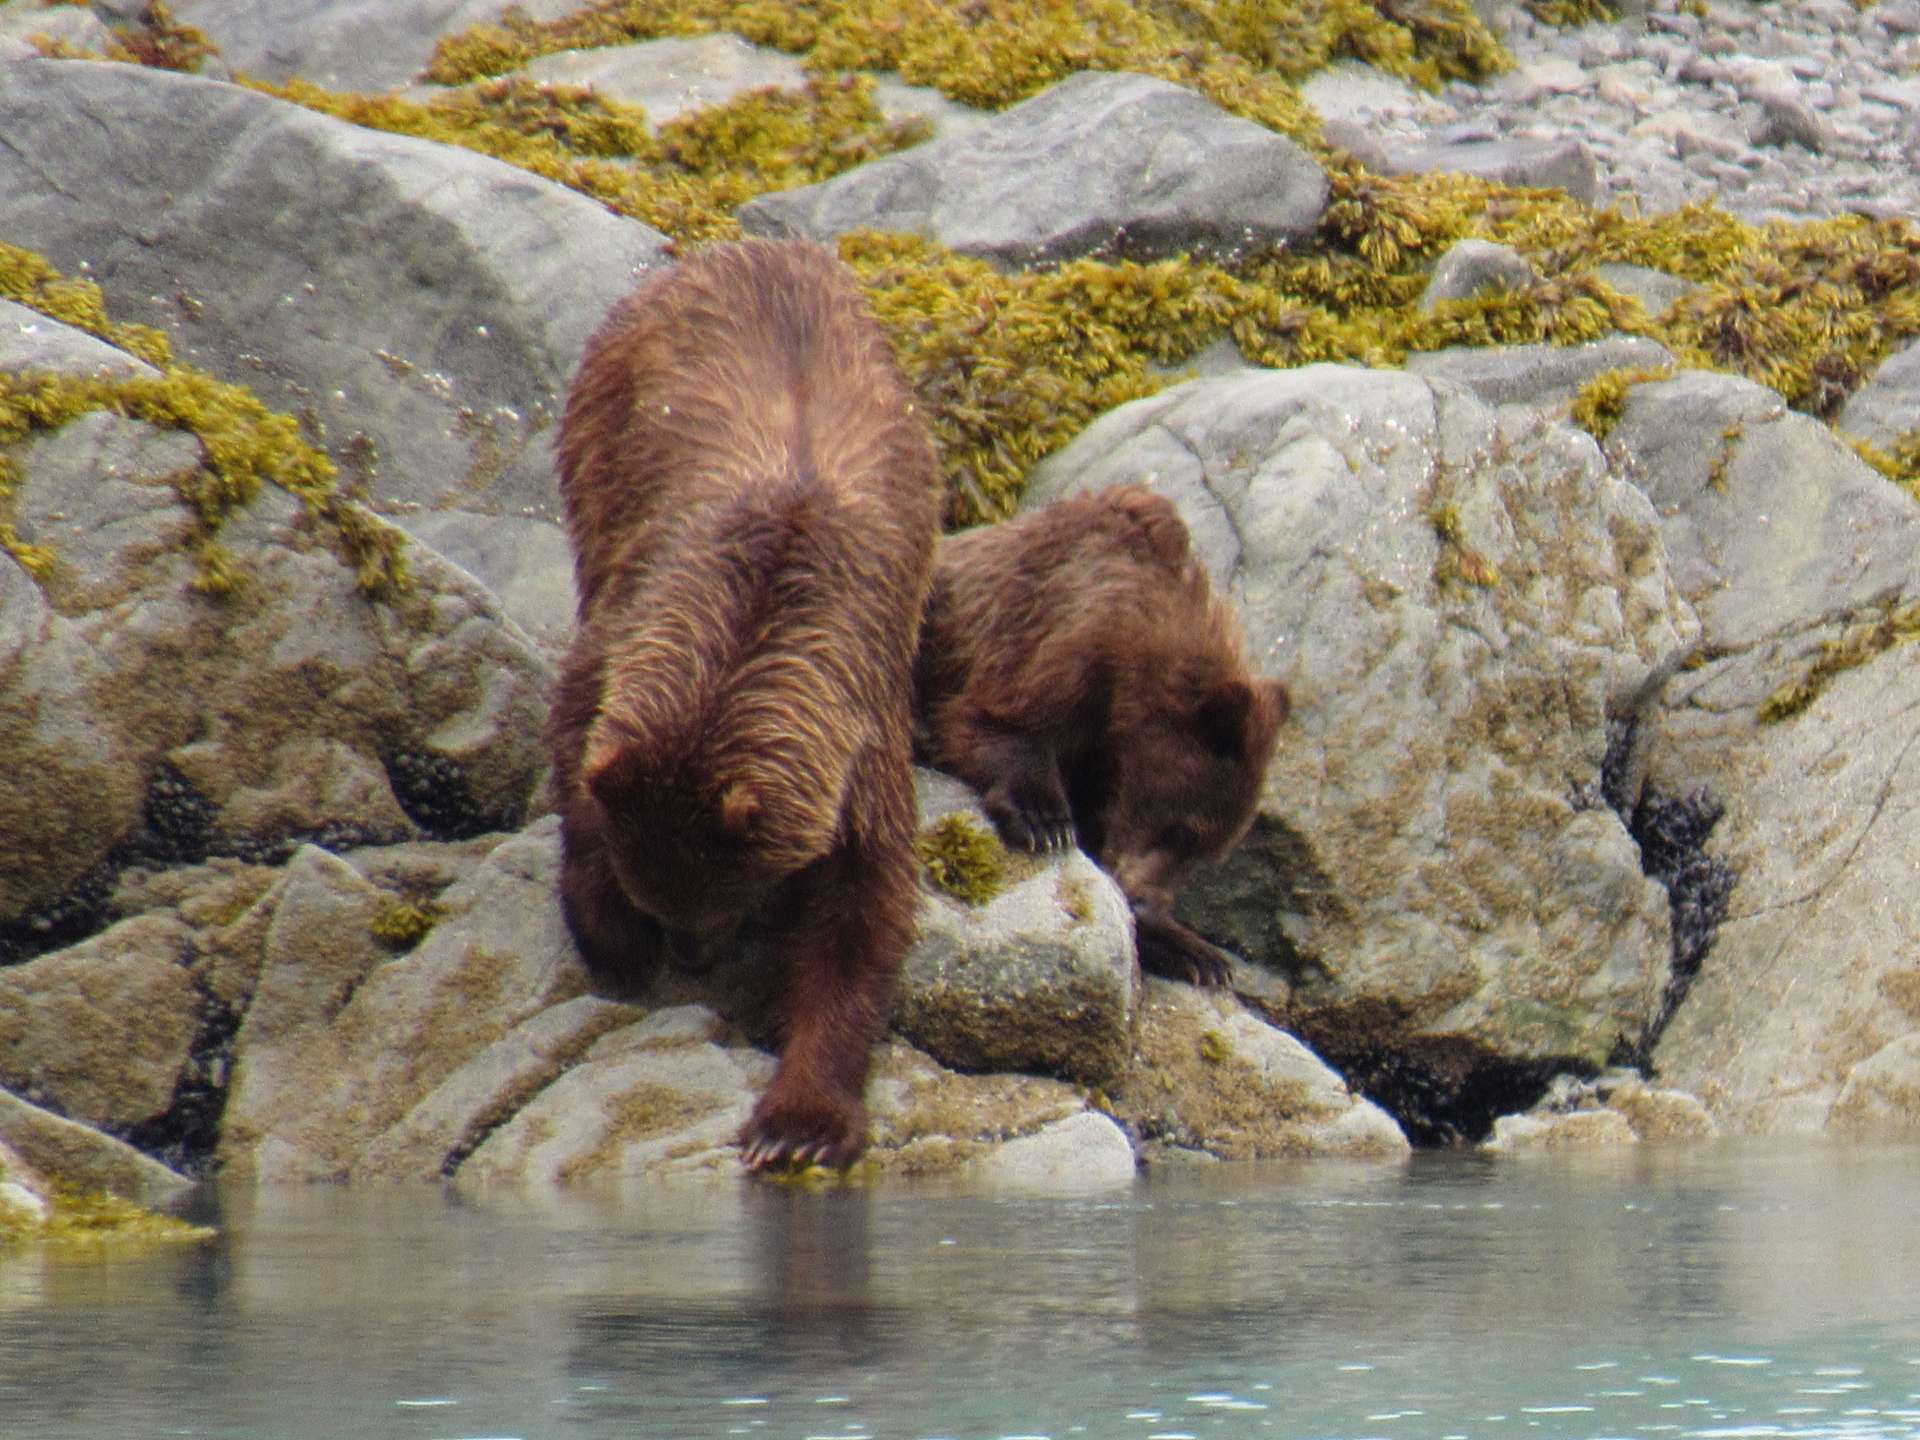 Snow Goose Yacht Charter - Up front views of brown bears are just part of the day to day experience